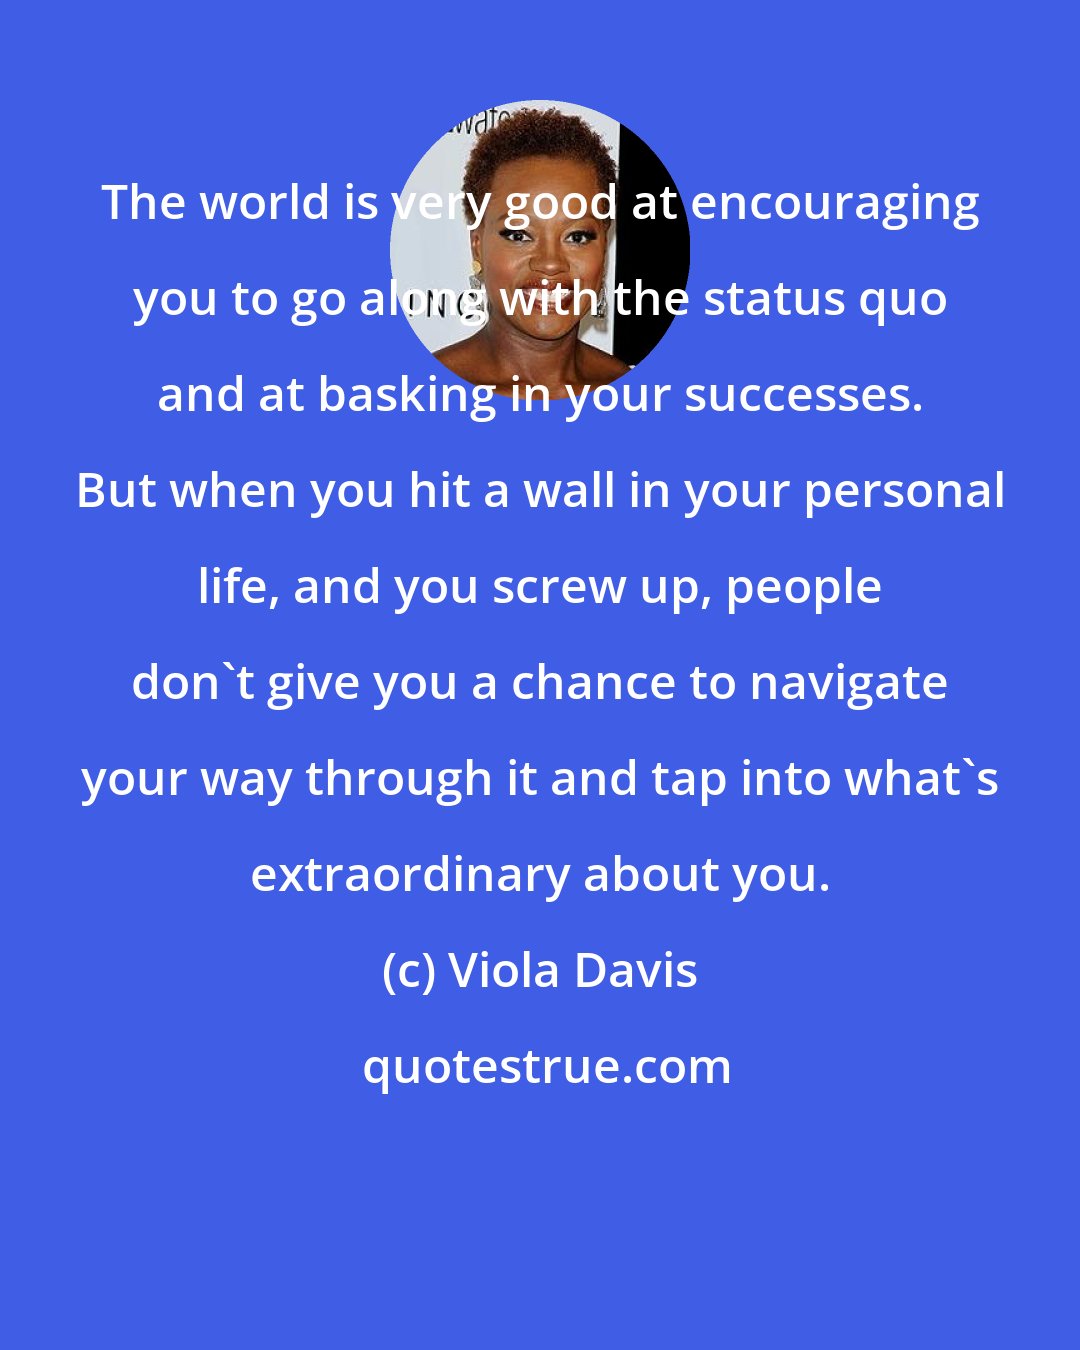 Viola Davis: The world is very good at encouraging you to go along with the status quo and at basking in your successes. But when you hit a wall in your personal life, and you screw up, people don't give you a chance to navigate your way through it and tap into what's extraordinary about you.